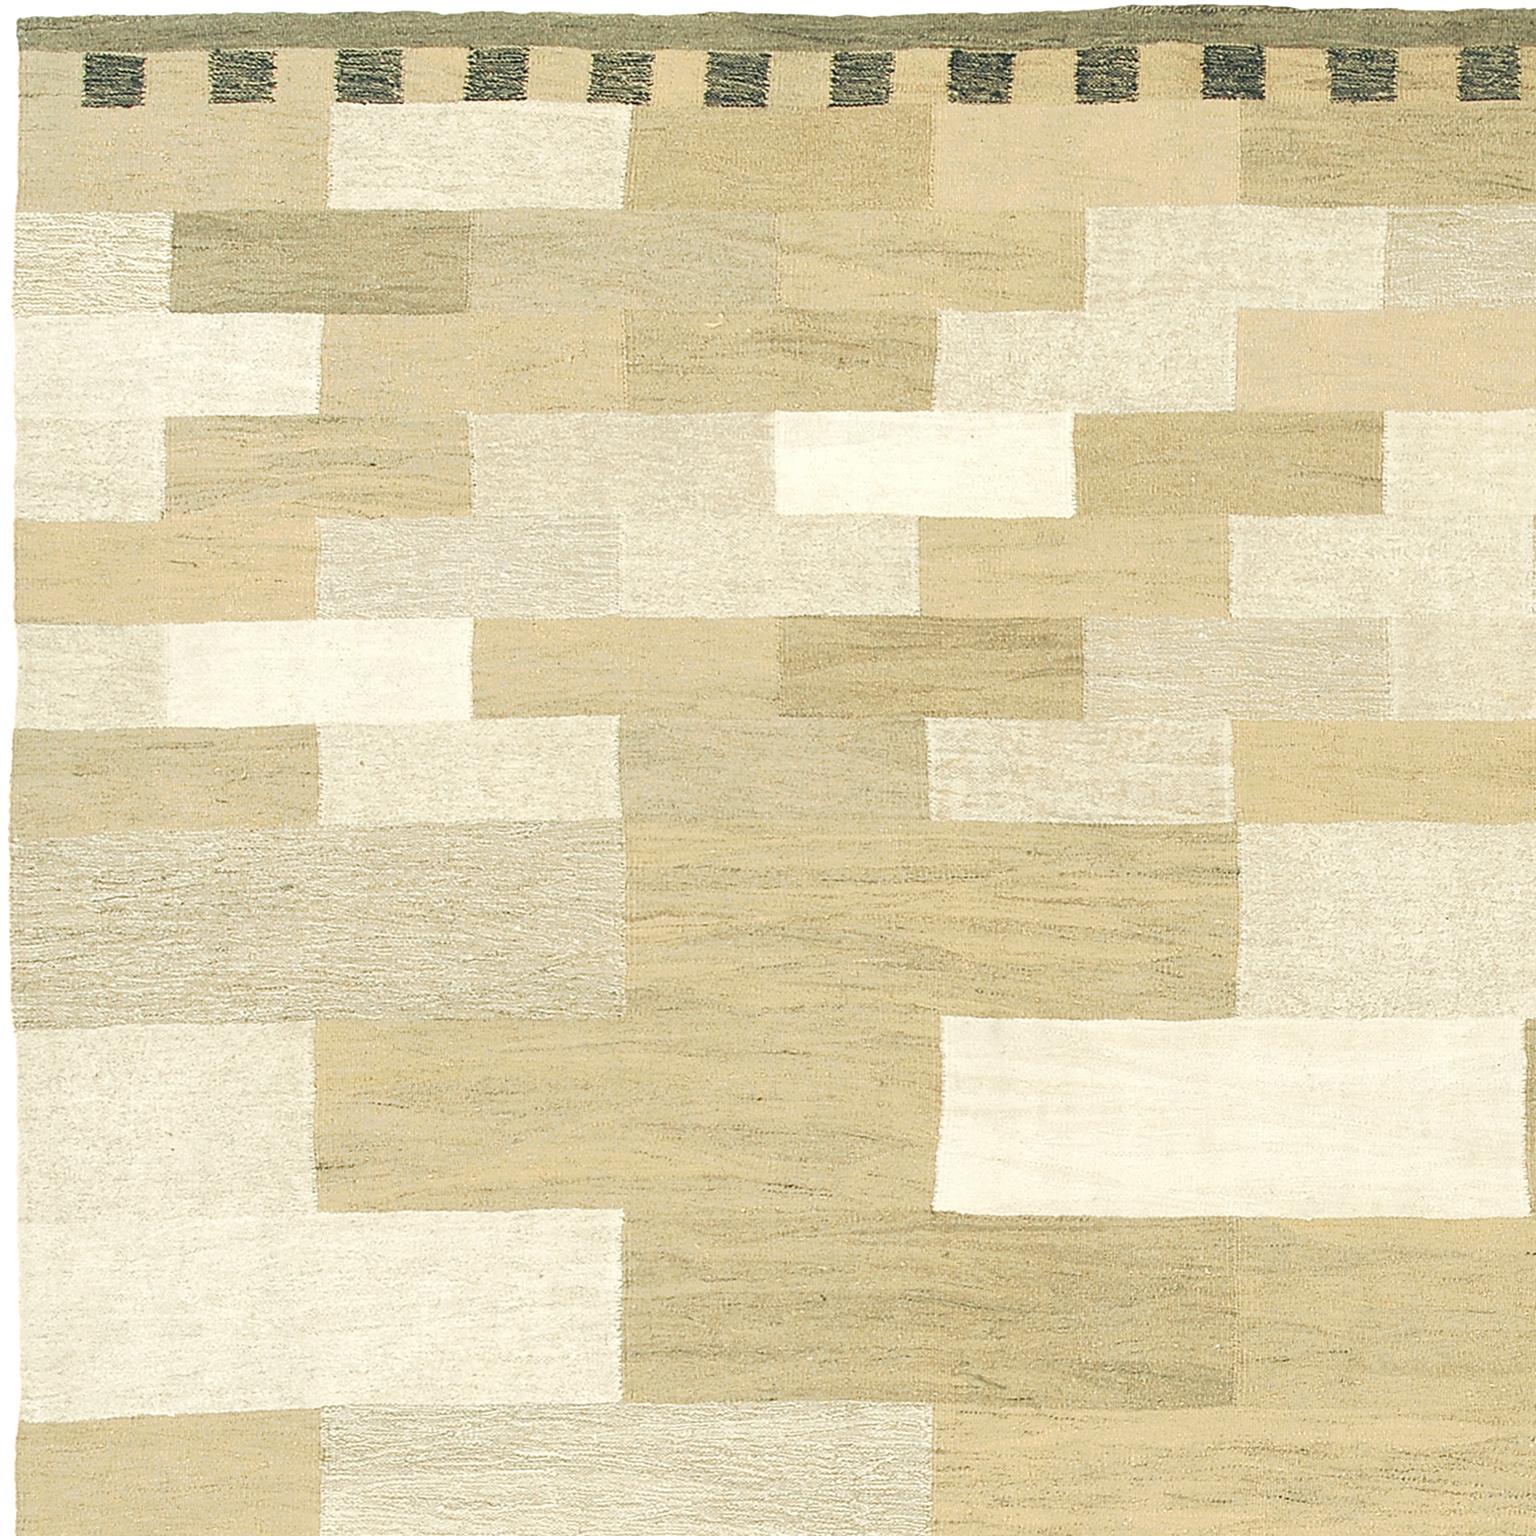 1940s Turkish panels are handwoven and are joined together by hand.